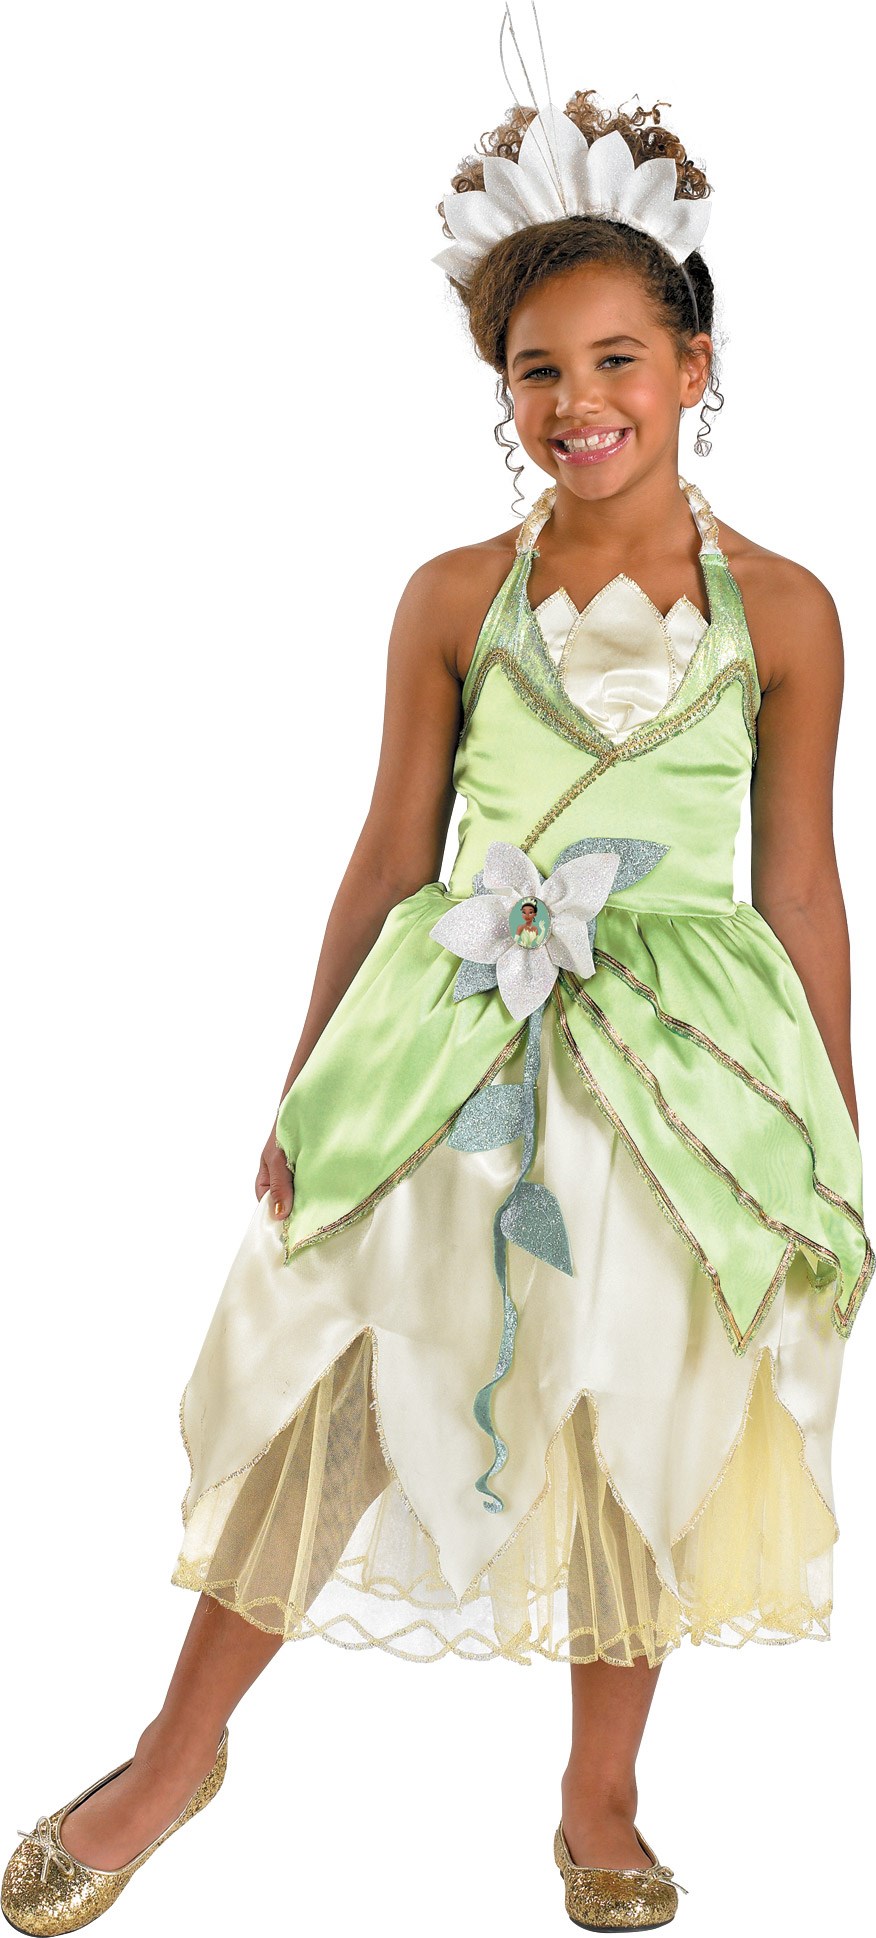 The Princess and the Frog Tiana Deluxe Toddler/Child Costume